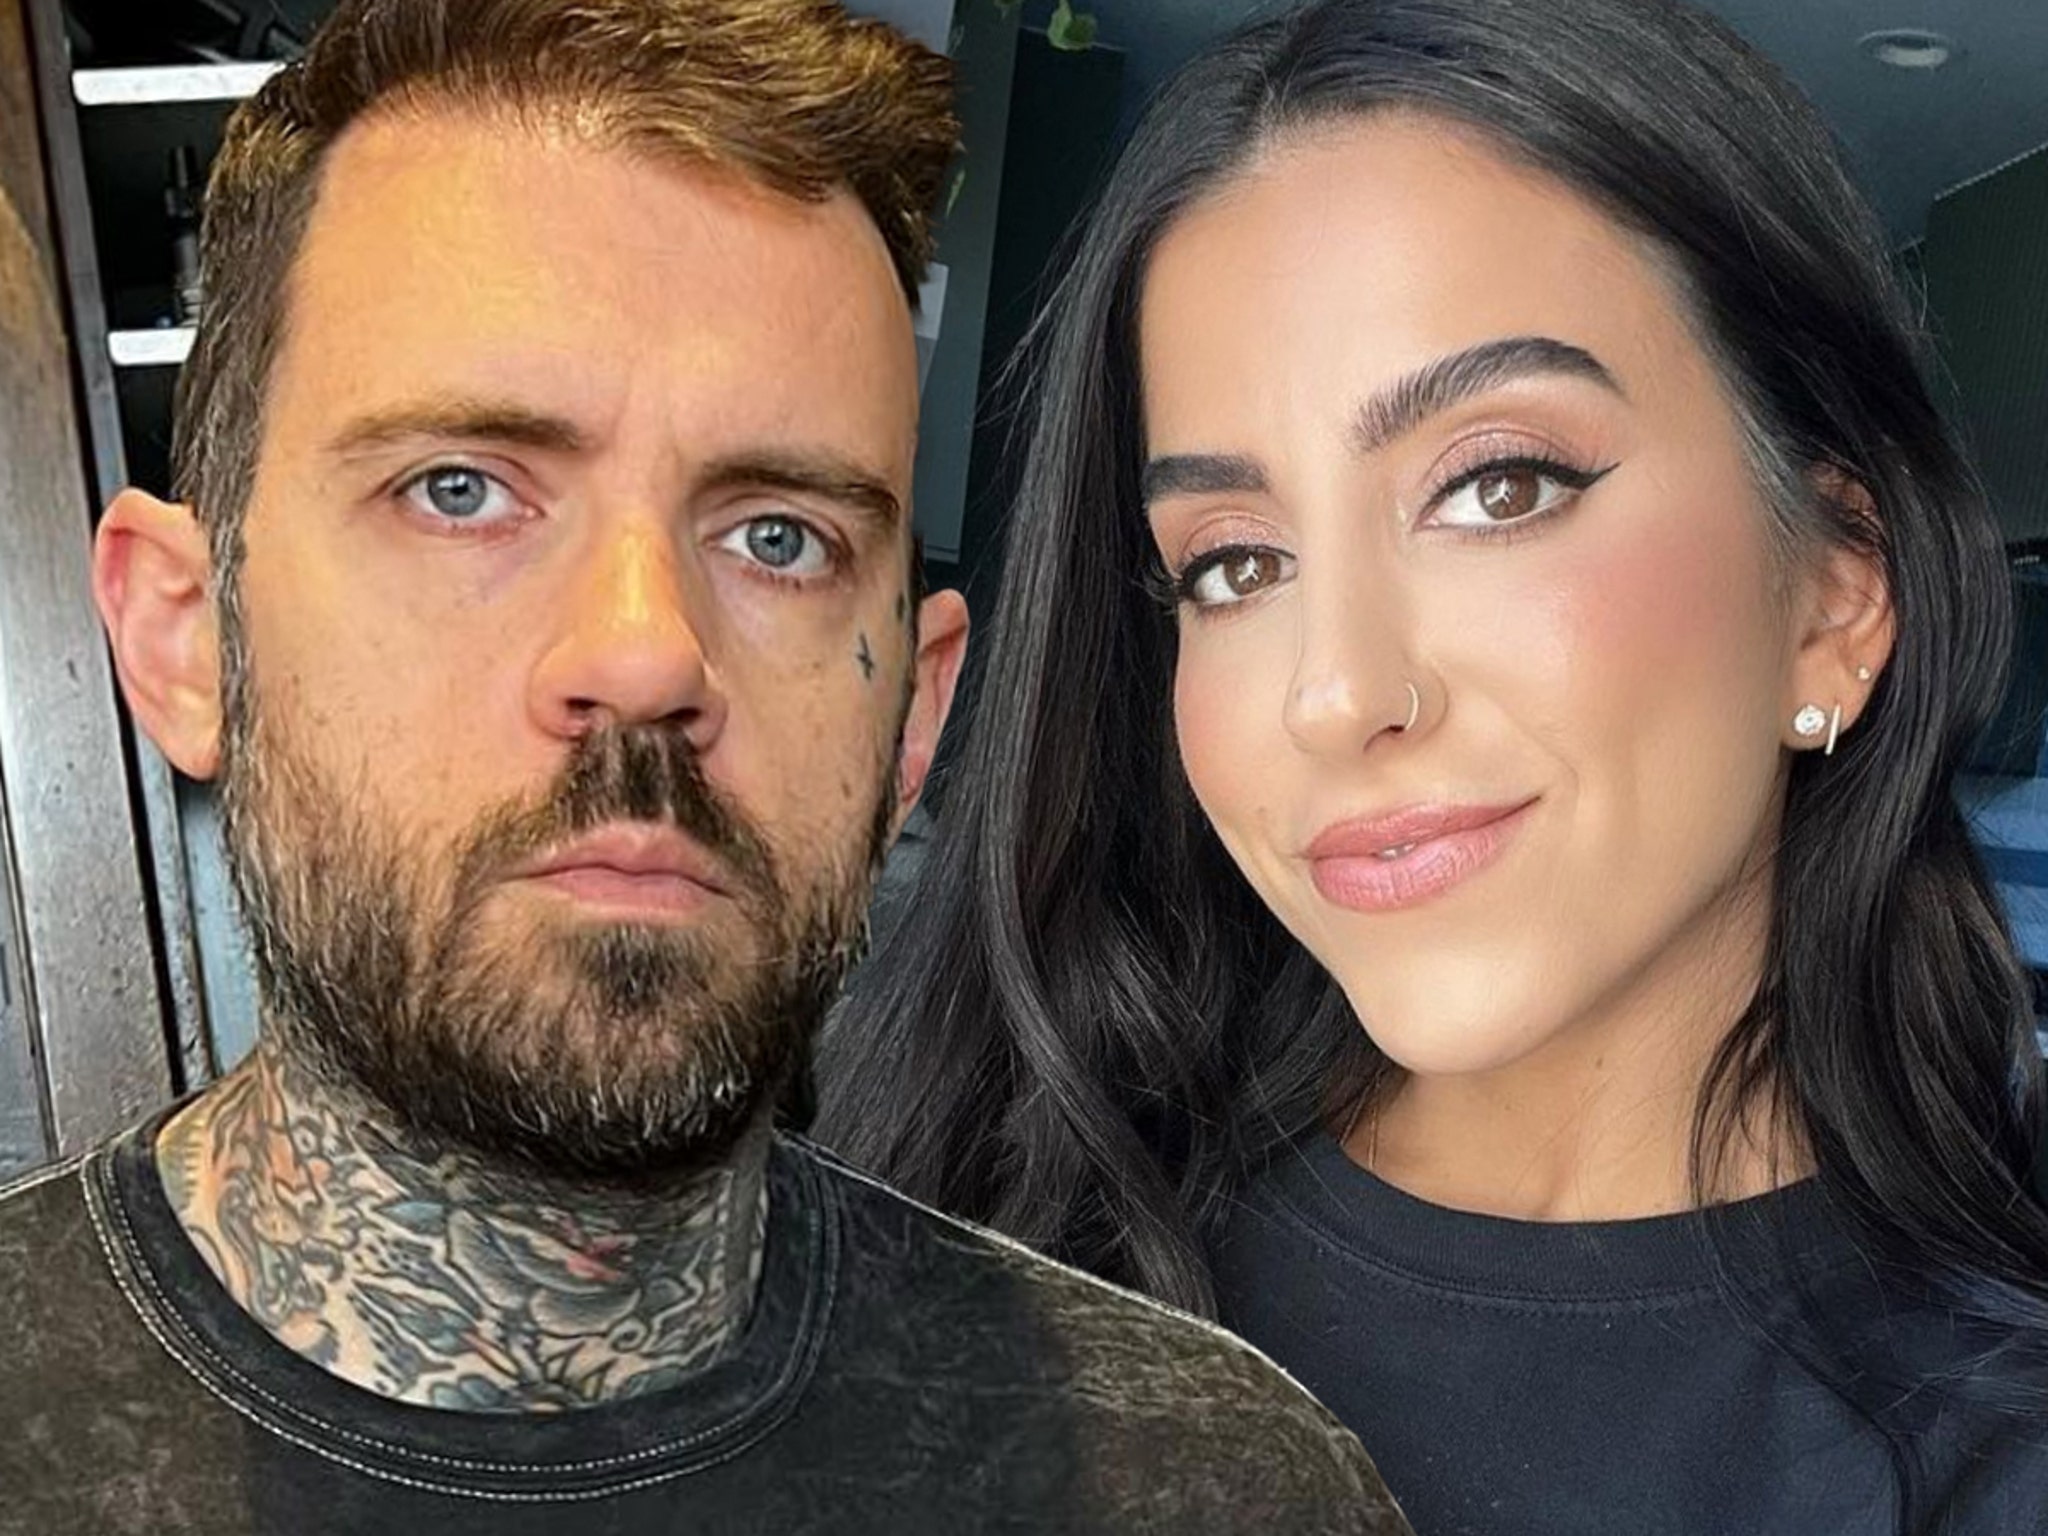 Wife Porn Pix - YouTuber Adam22 Fine With Wife's Porn Star Career After Getting Married